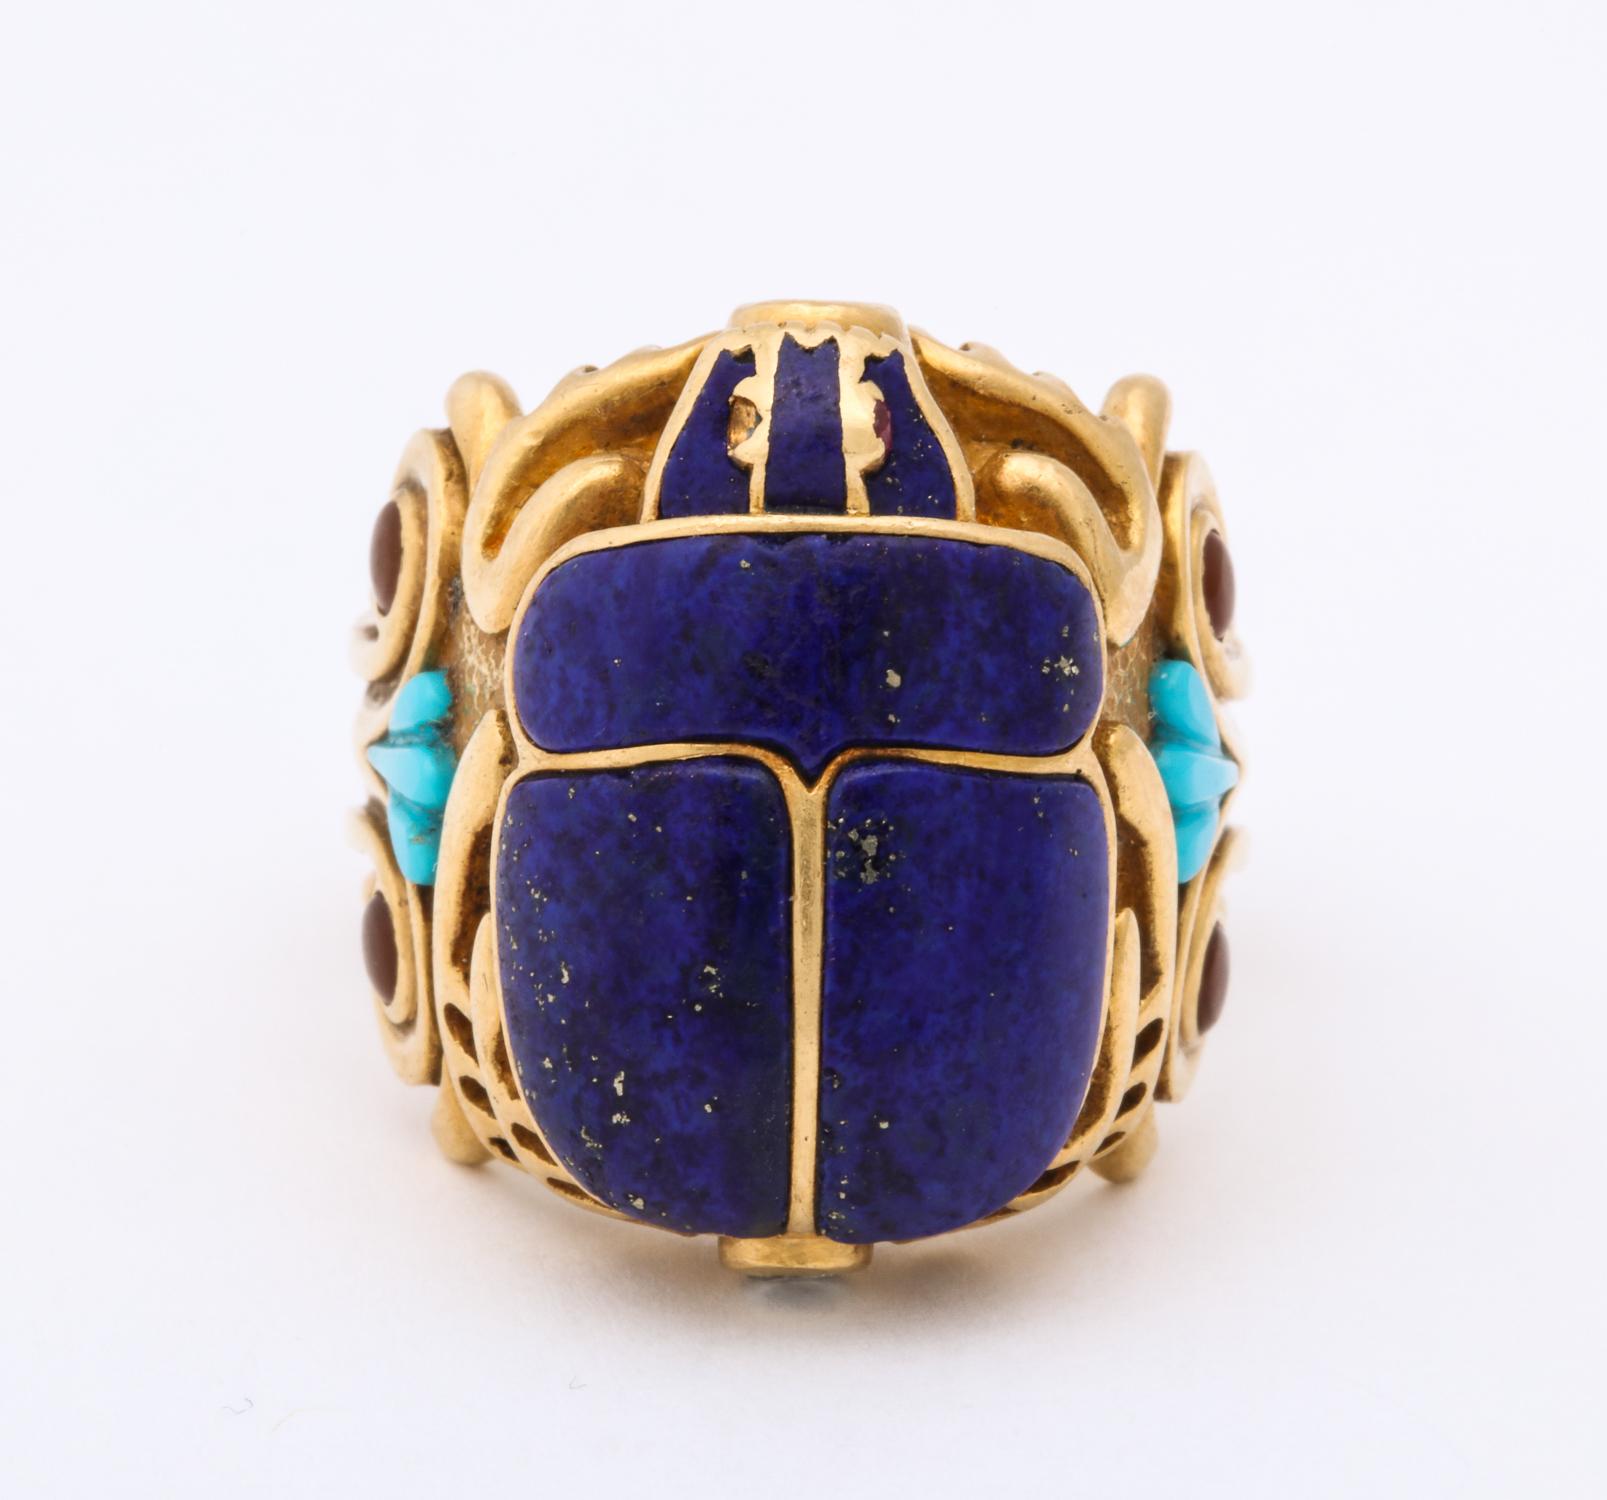 One Handmade Unisex Ring In Form Of A Figural Scarab Secada. Ring Is Embellished With A Lapis Lazuli Stone For Its Body And With Four Cabochon Citrine Stones. Ring Is Flanked By Teo Fan Shaped Carved Turquoises. Secada Ring Is Also Designed With Two